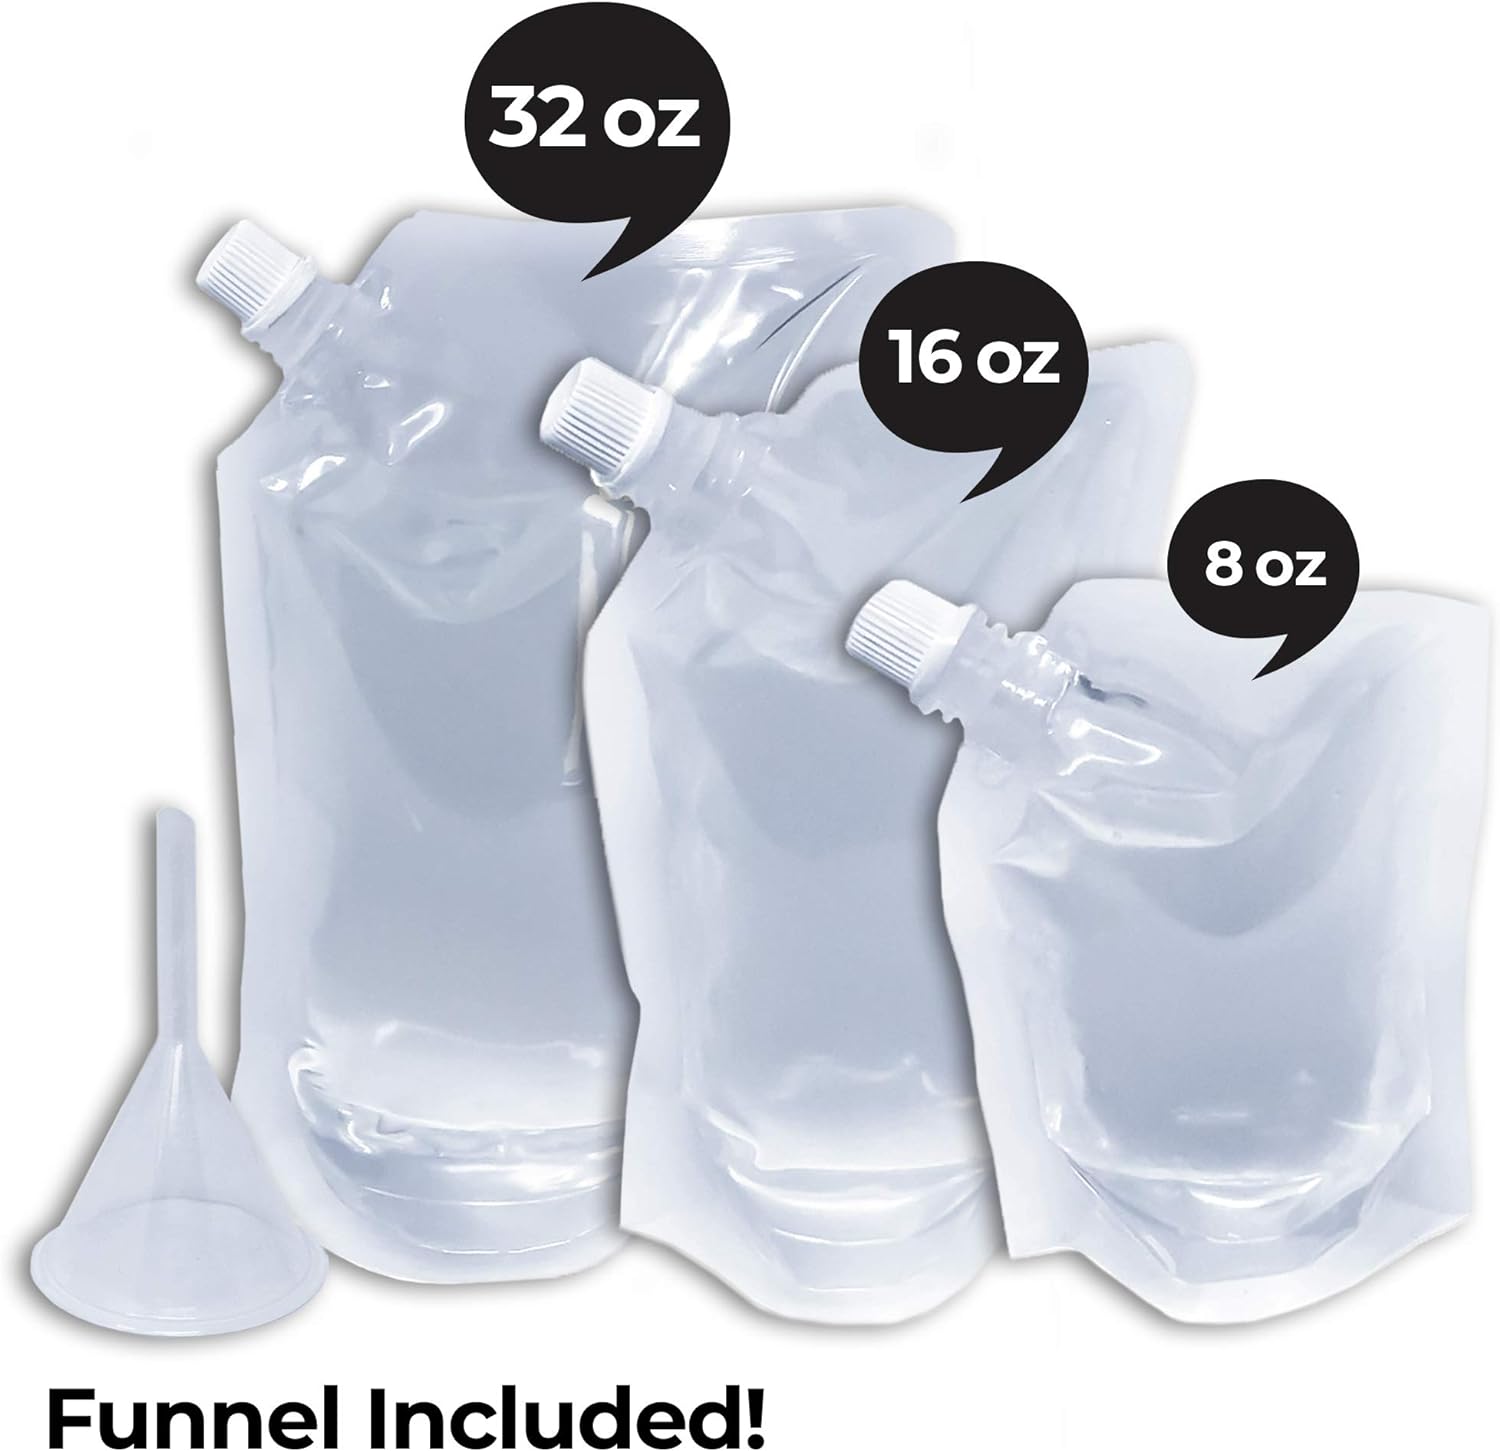 Zulay Plastic Flasks - 3 Pack